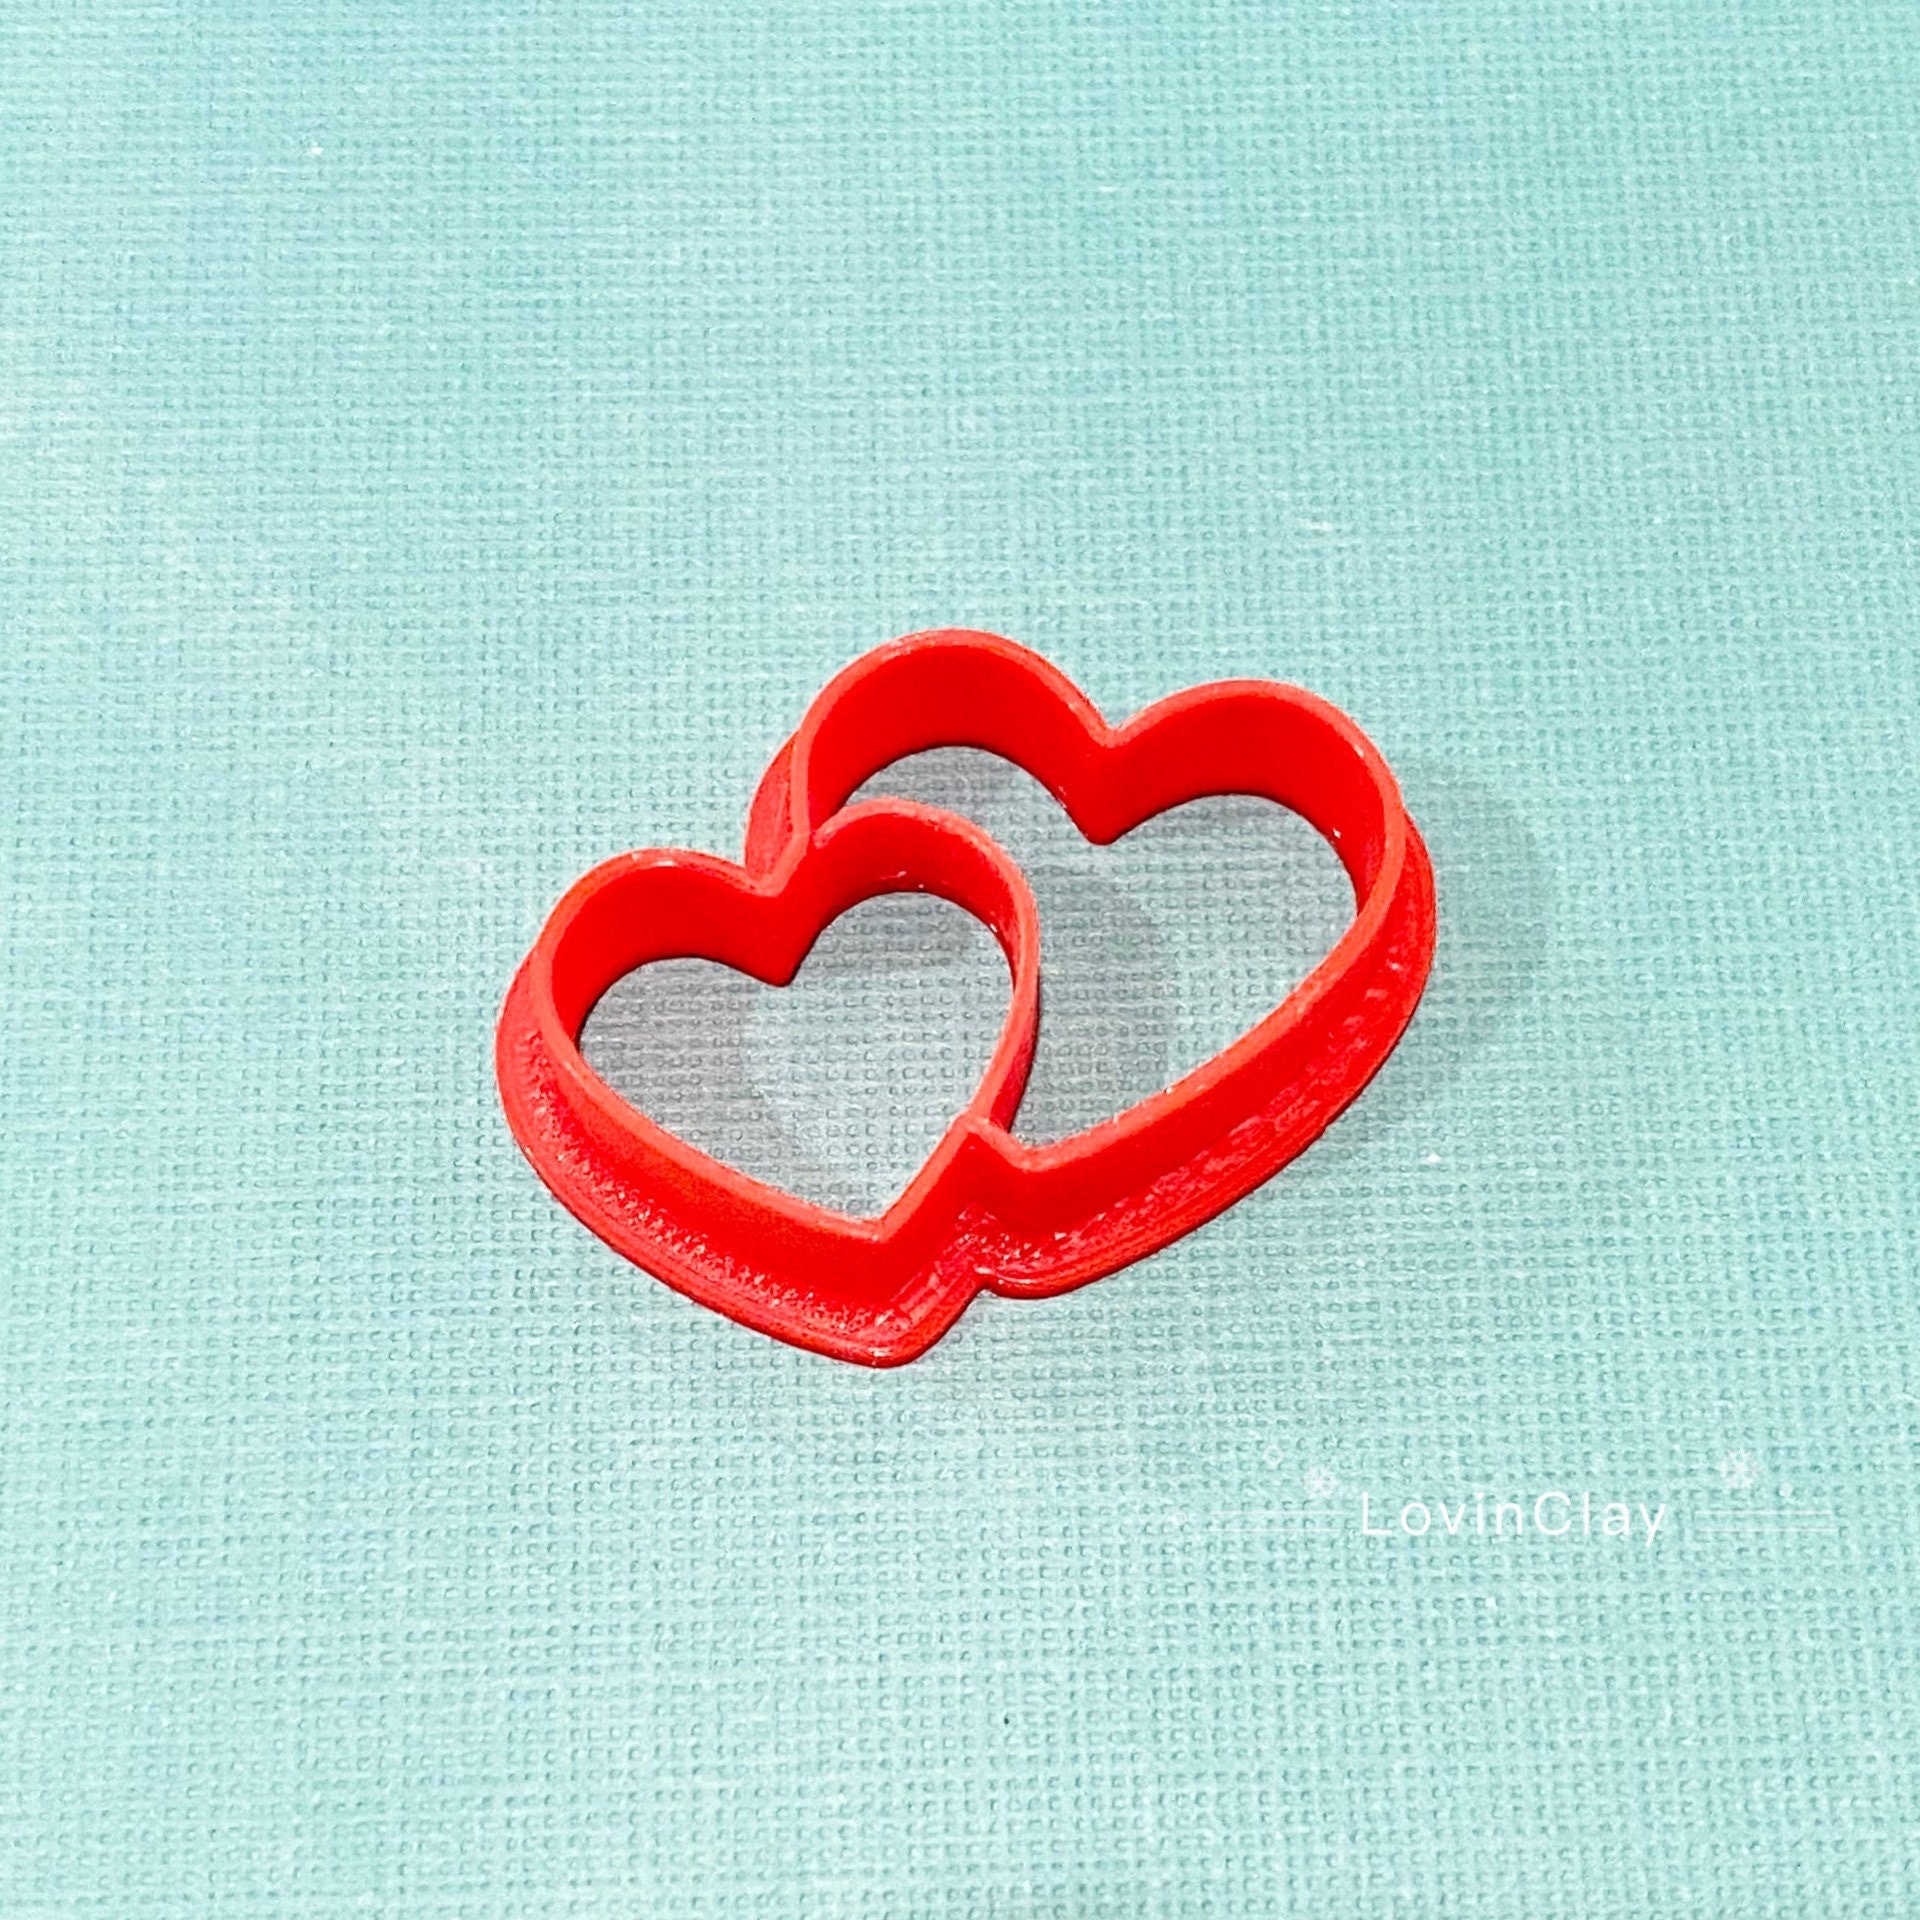  Puocaon Valentines Polymer Clay Cutters - 9 Pcs Clay Cutters  for Polymer Clay Jewelry Making, Heart Shape Polymer Clay Jewelry Cutters,  CD Butterfly Sunflower Clay Cutters Cassette Tape Band-aid